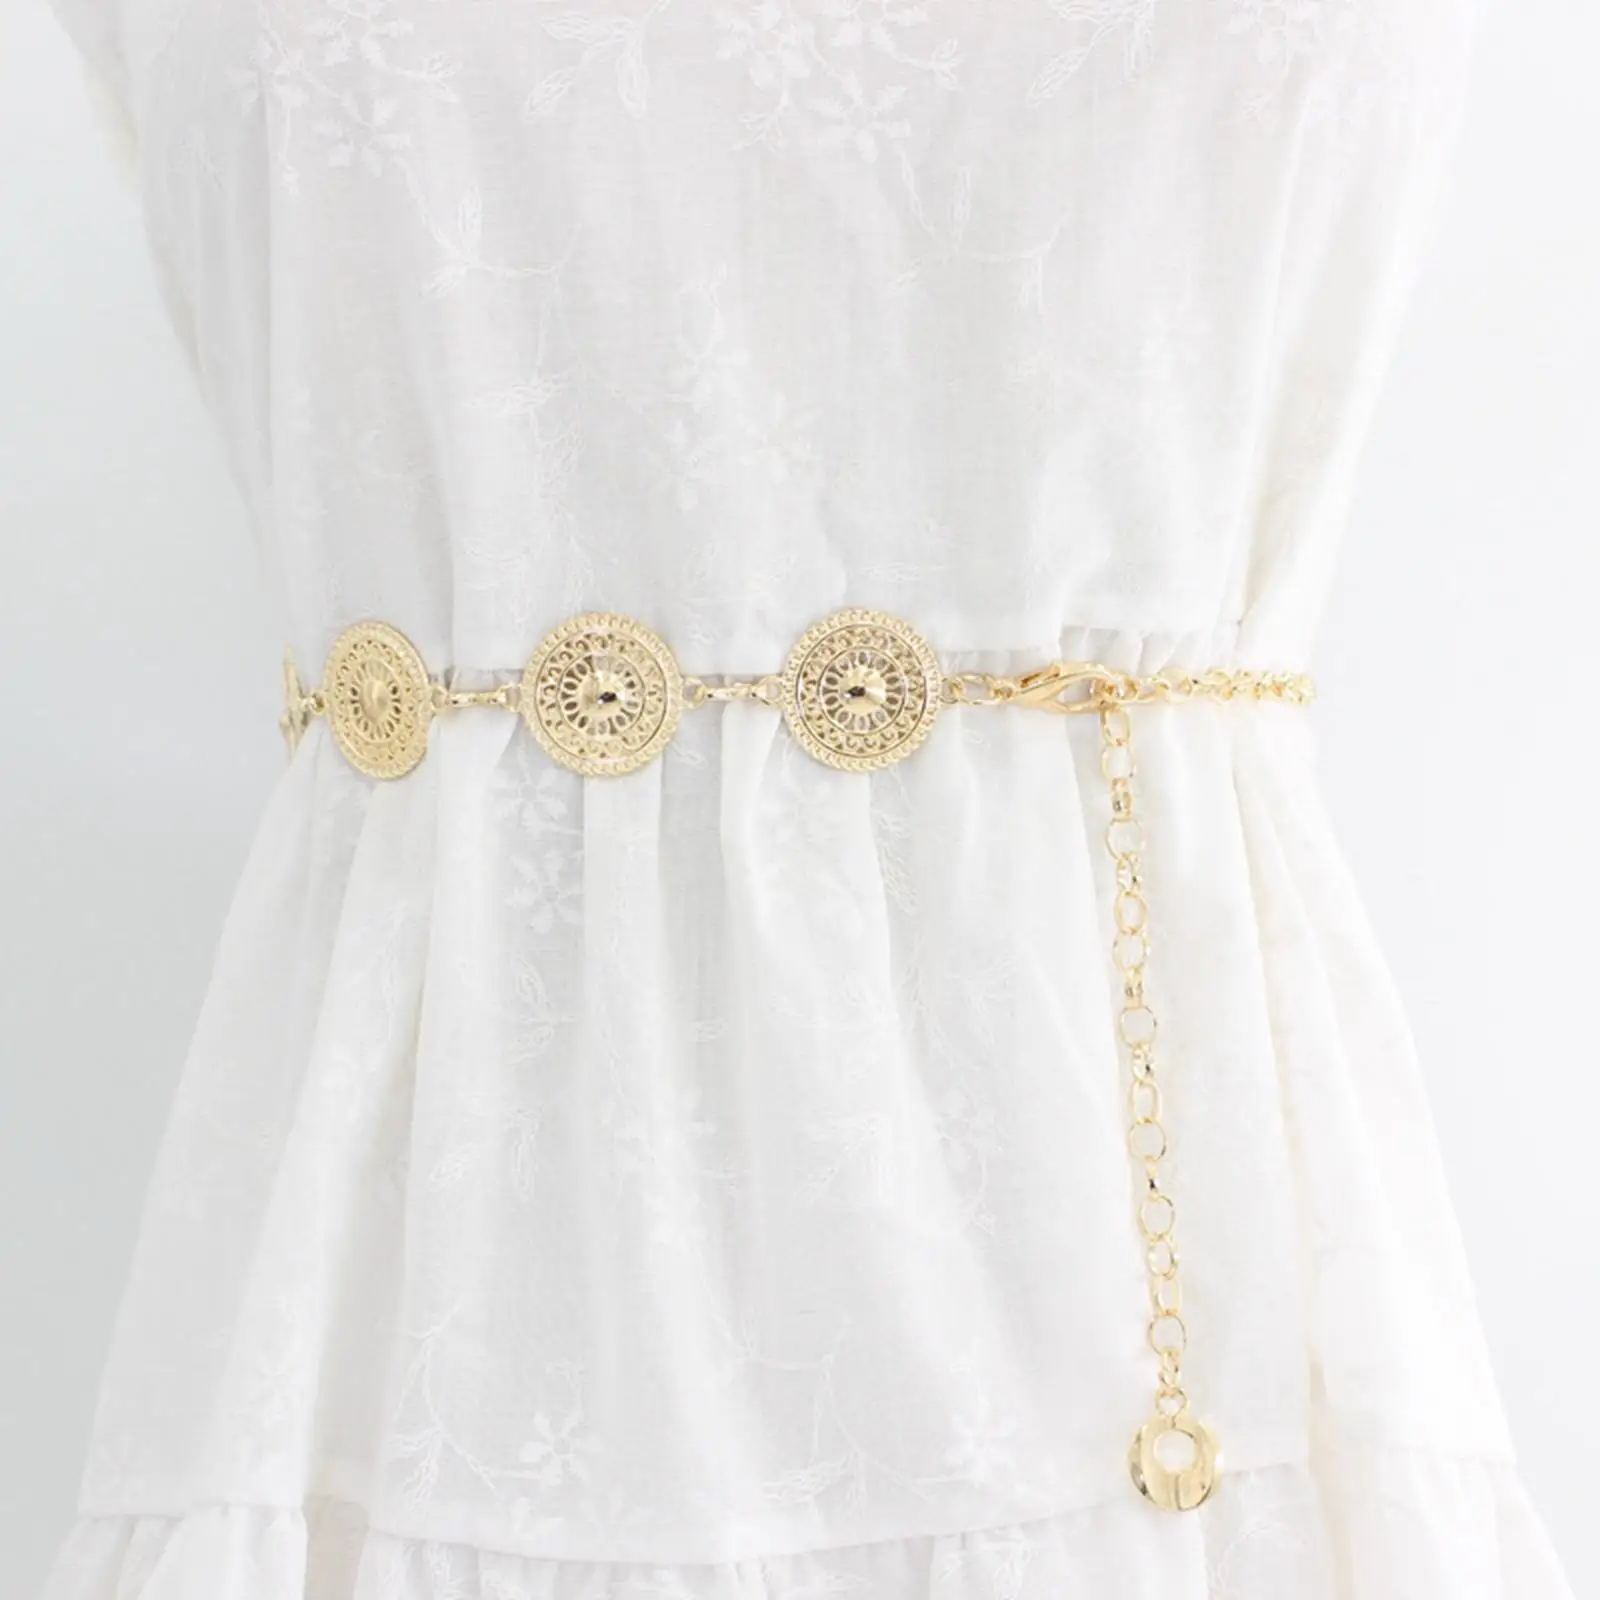 Women Waist Chain Belt Metal Chain Adjustable Body Chain for Dress Outfit